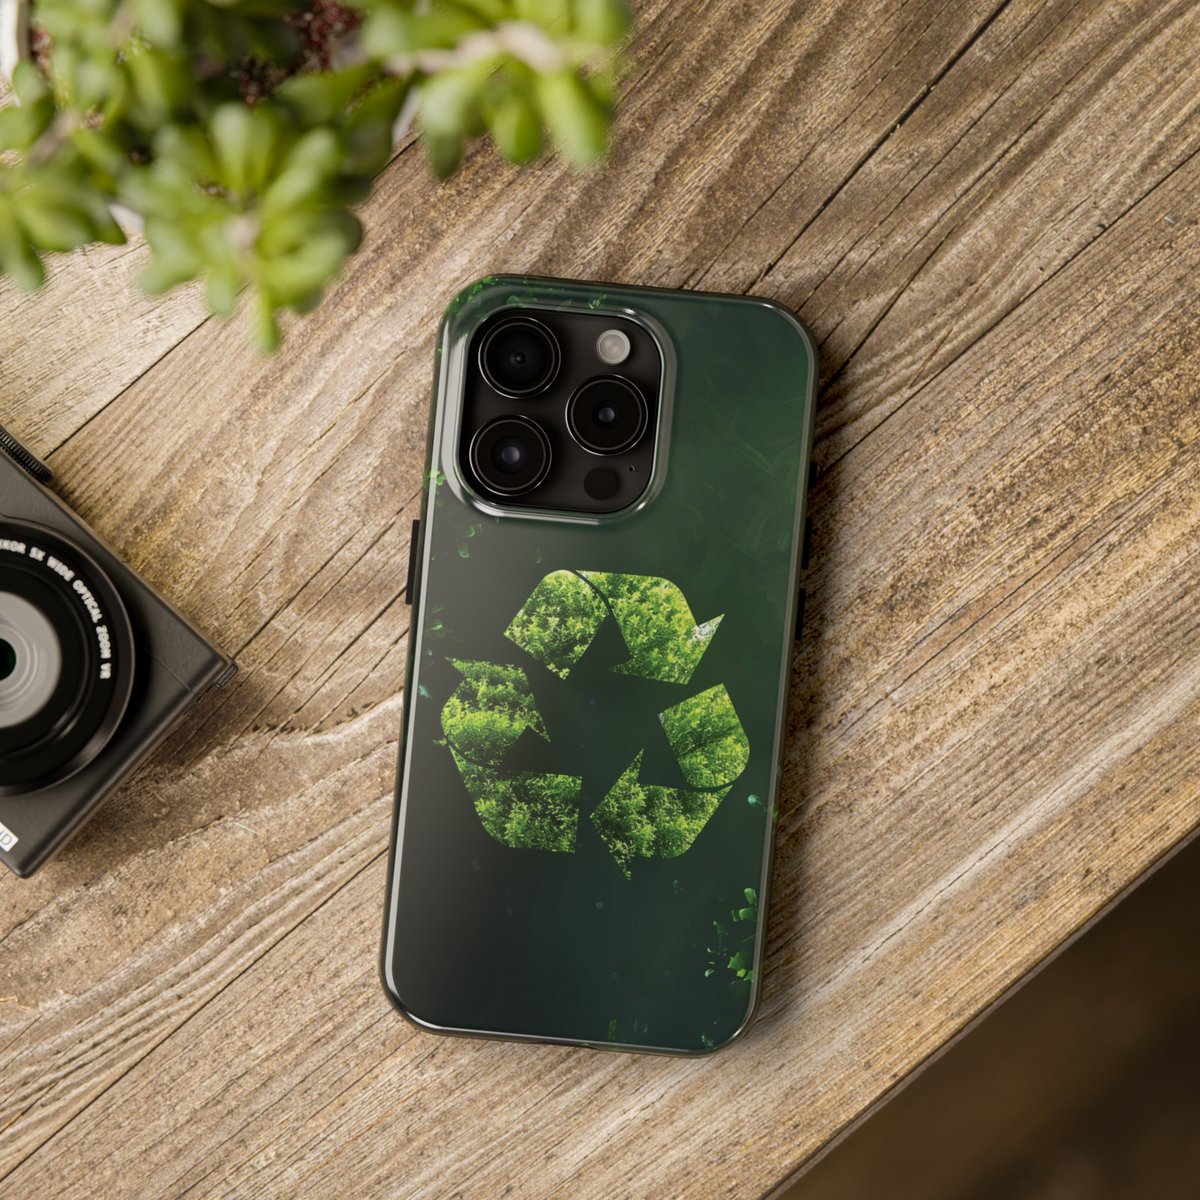 Earth Day Recycle phone case for iPhone - Link in Bio!

#phonecase #iphonecase #aestheticphonecase #aesthetic #iphone11 #iphone12 #iphone13 #iphone14 #iphone15 #iphone16 
#EarthDay #EarthDay2024 #savetheocean #savetheearth #savetheplanet #green #Environmental #recycle